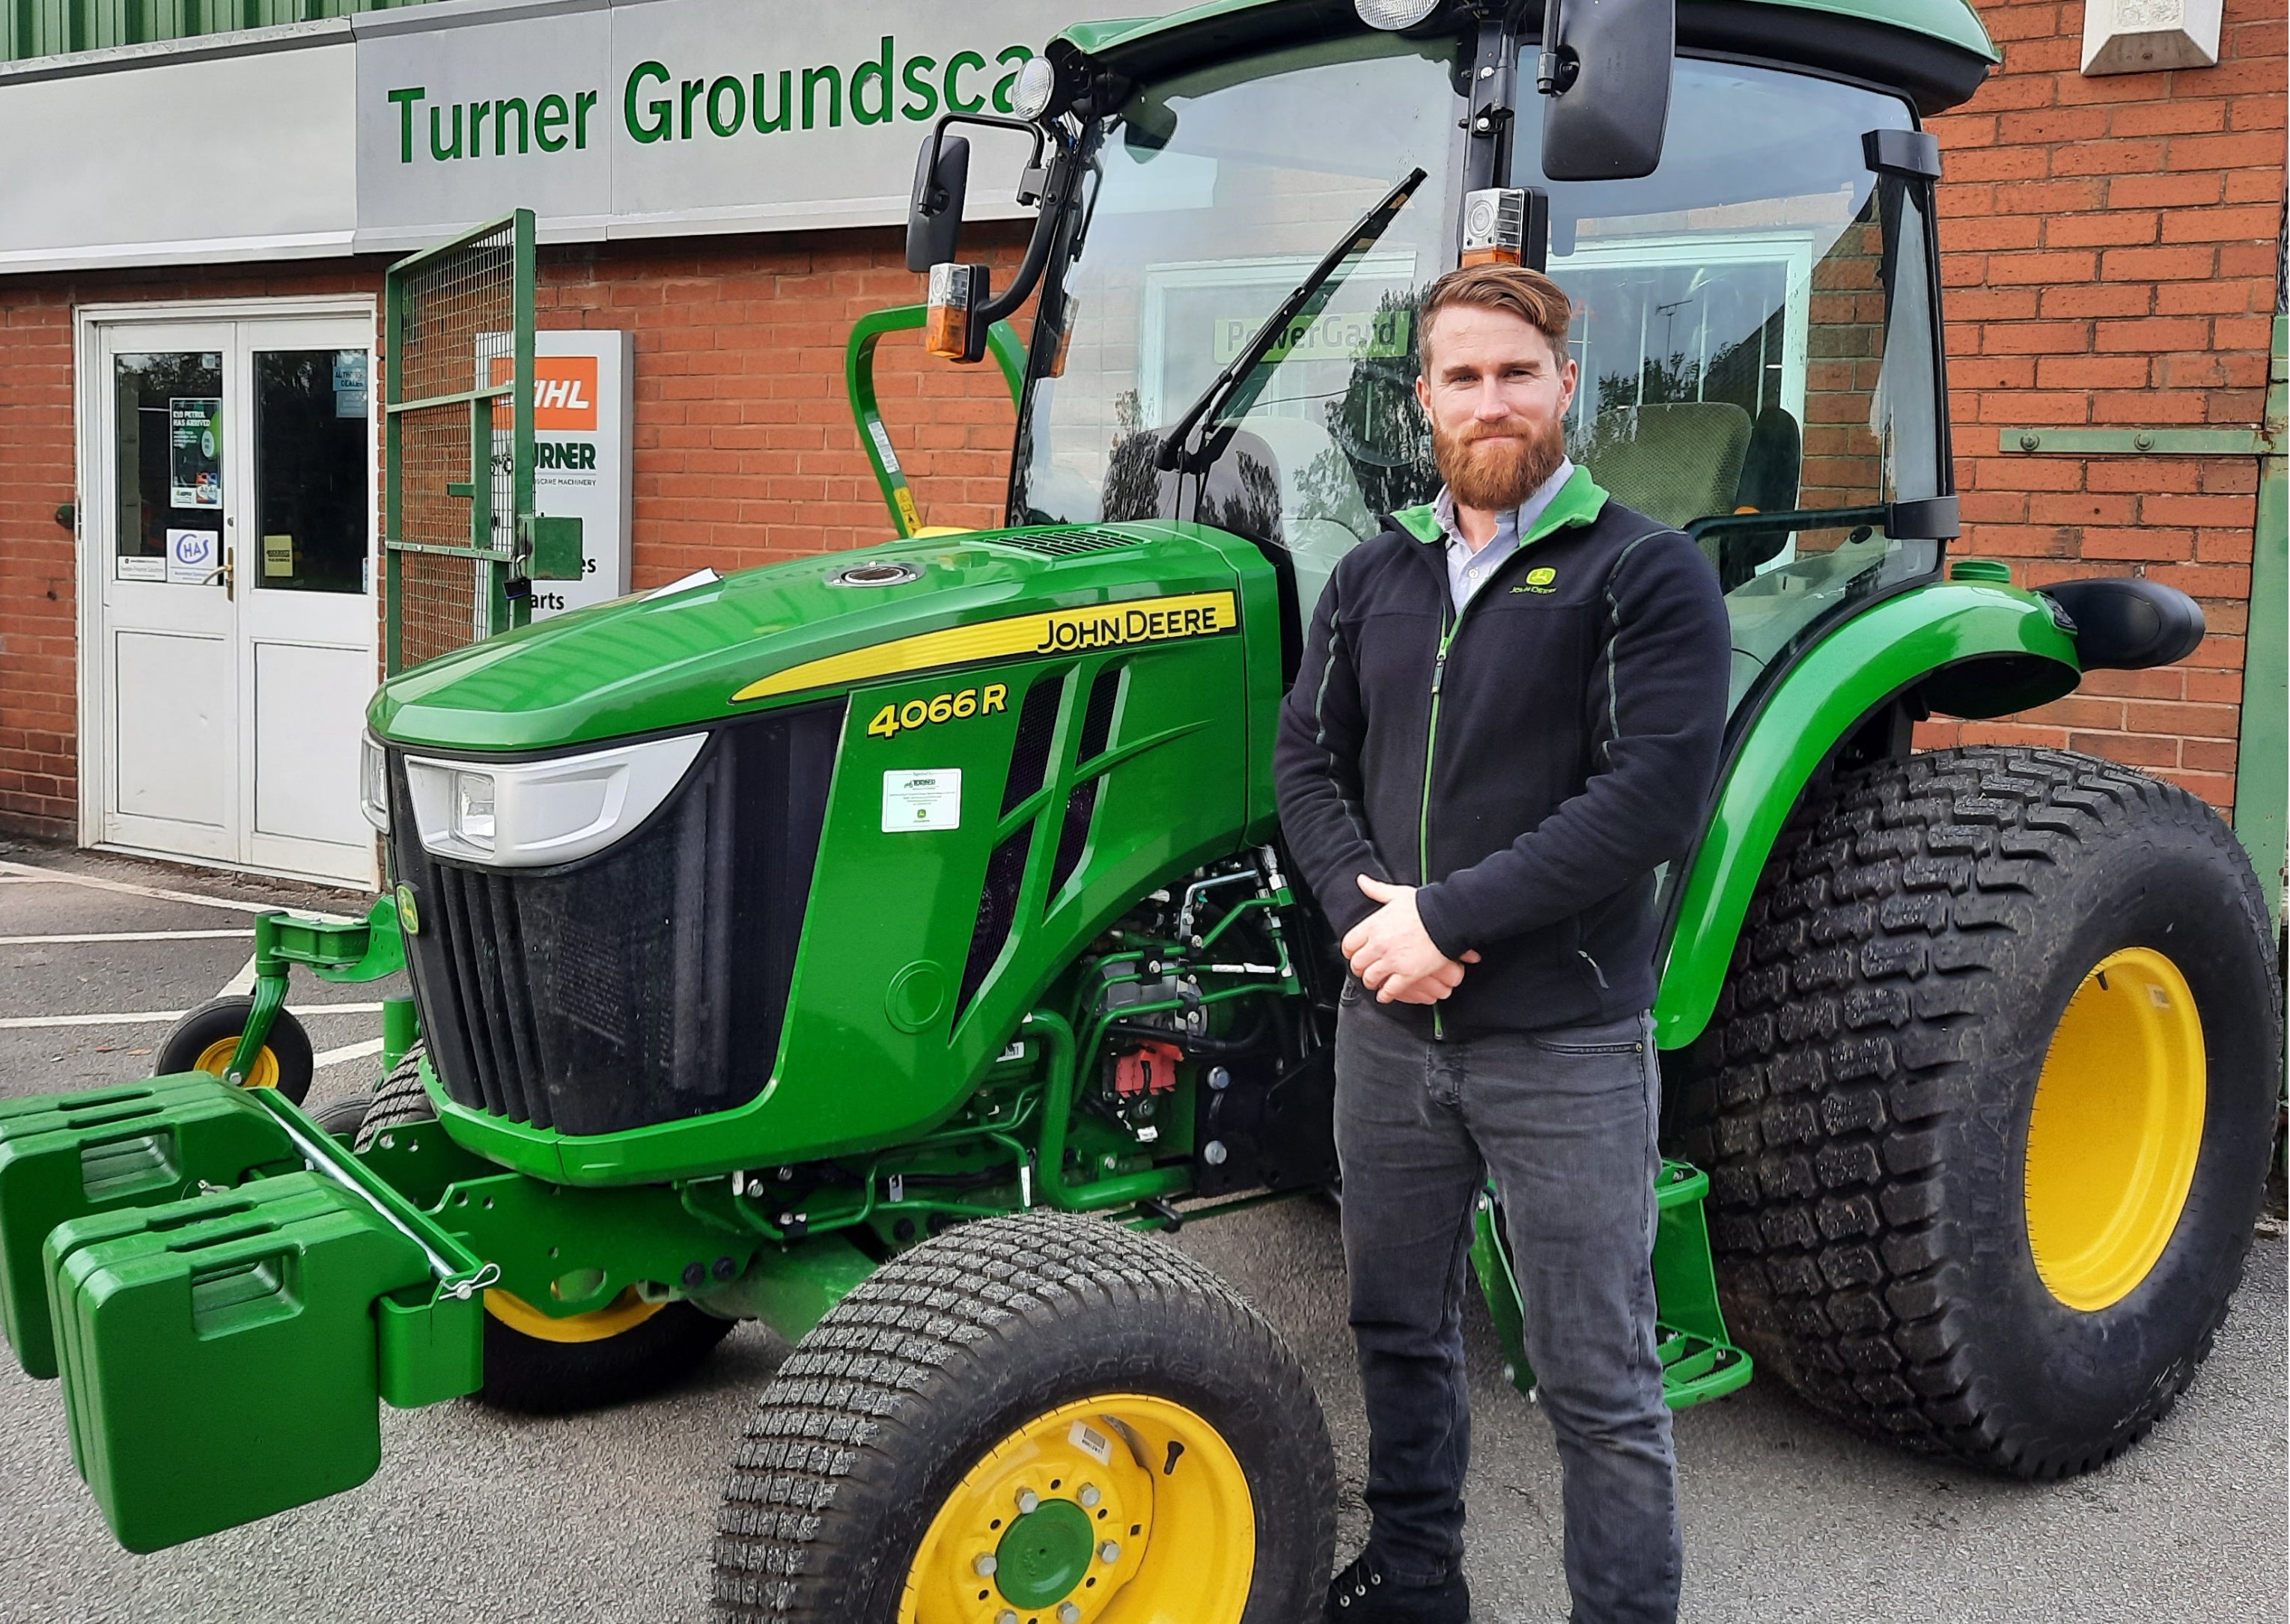 Armed forces background ‘a perfect fit’ for career in professional groundscare